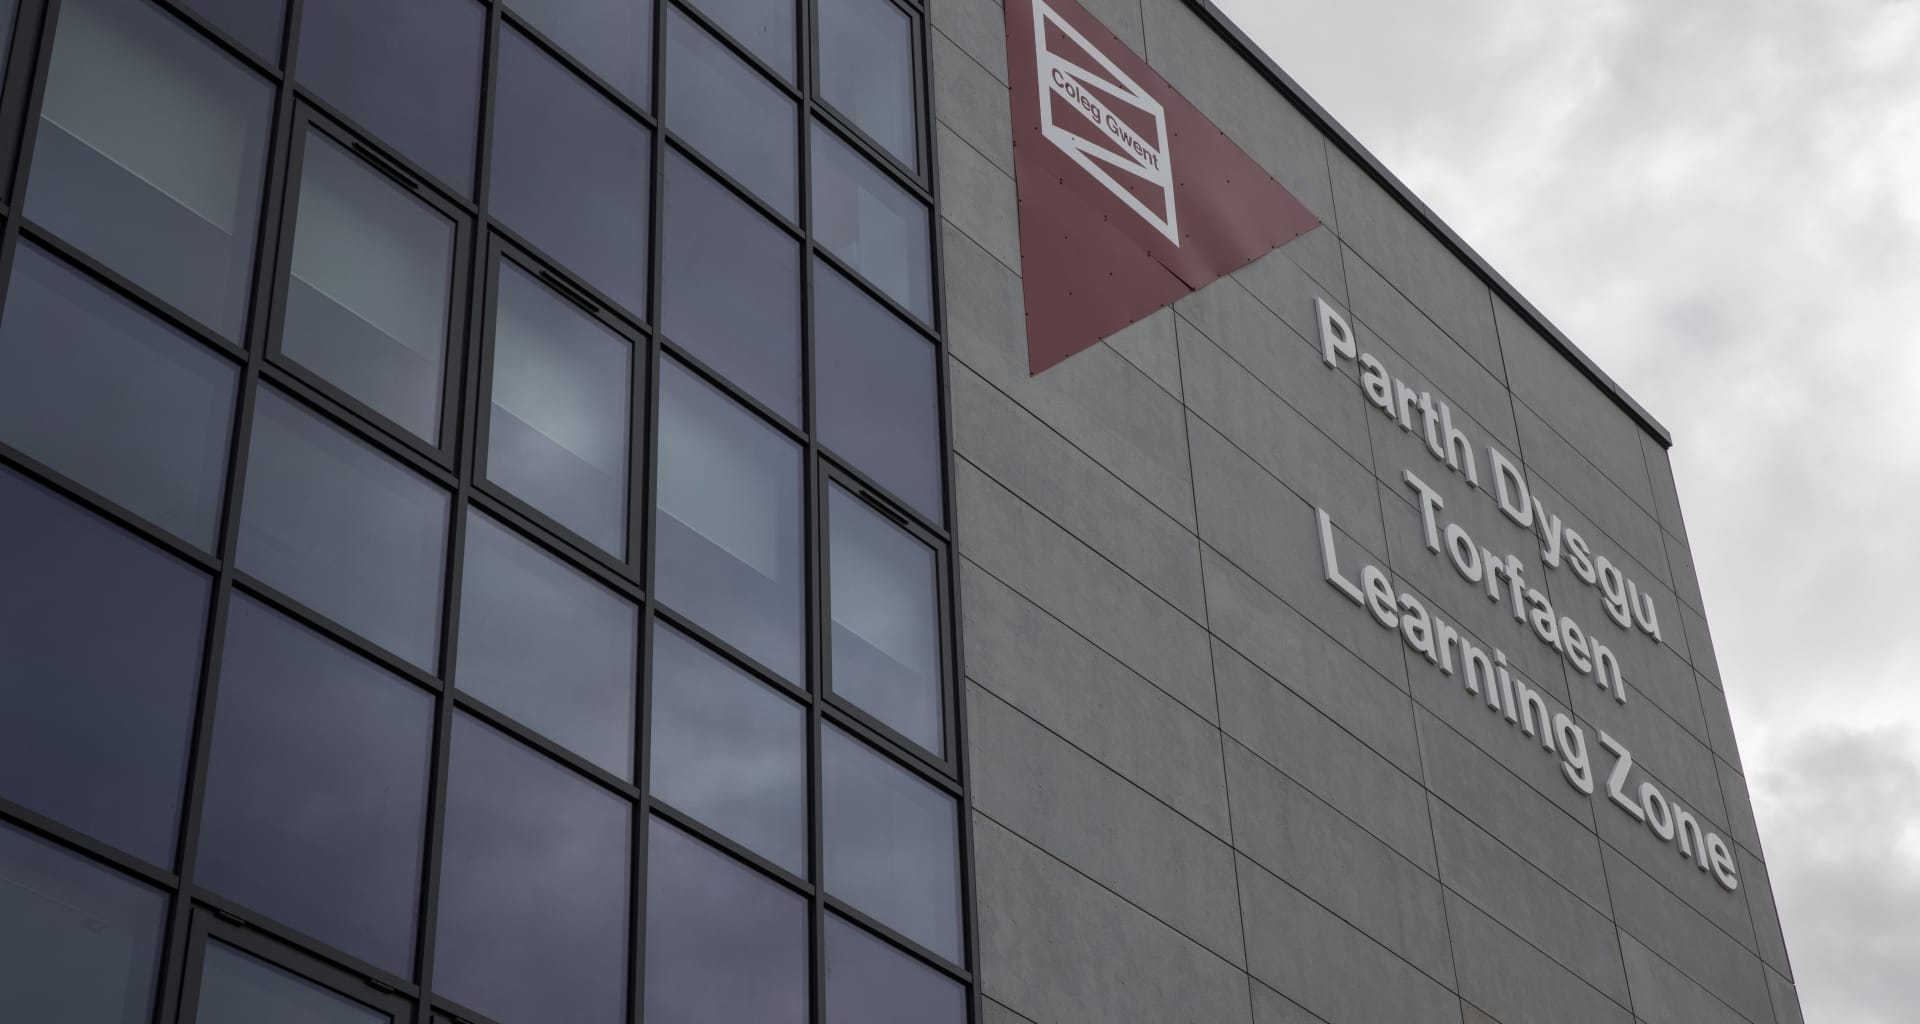 Torfaen Learning Zone